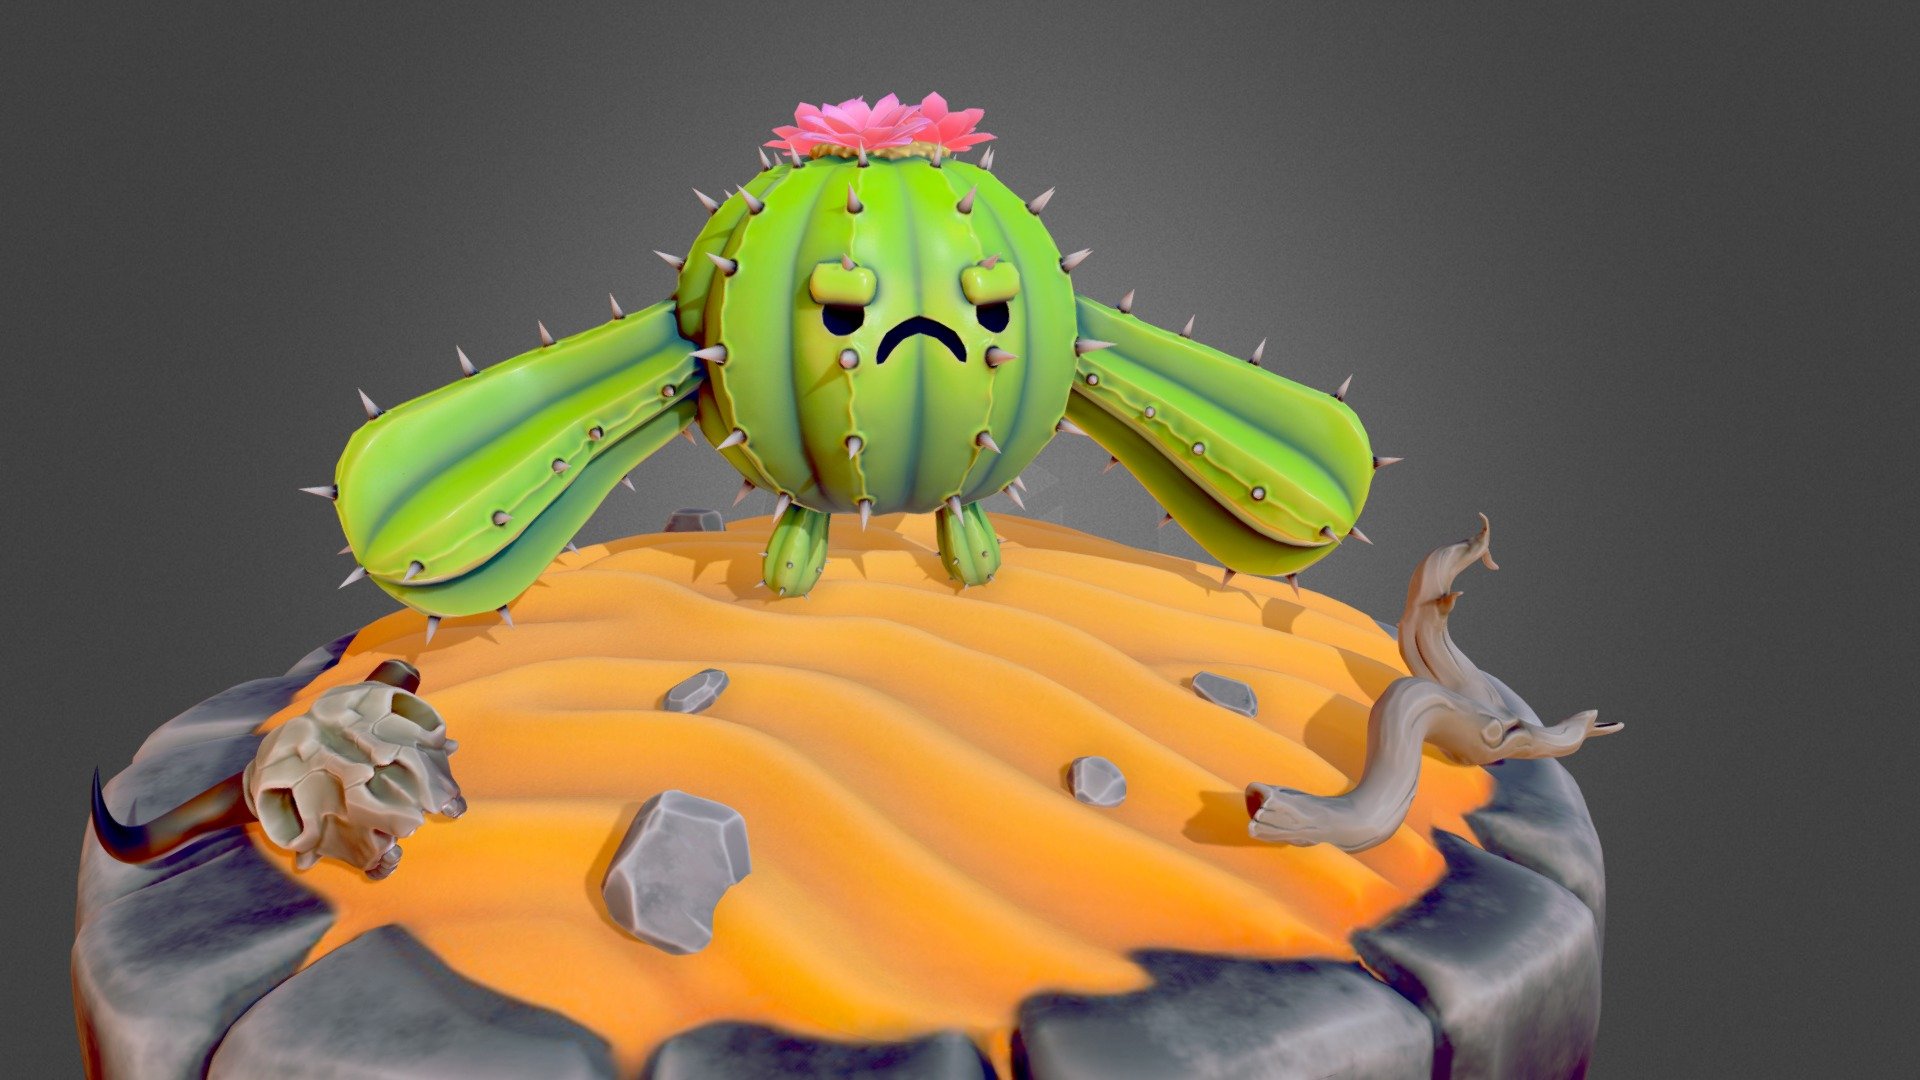 A lil cute angry cactus I made for fun, I don't normally design my own models but I really wanted to this time.
Made with Zbrush, maya and substance painter 3d model